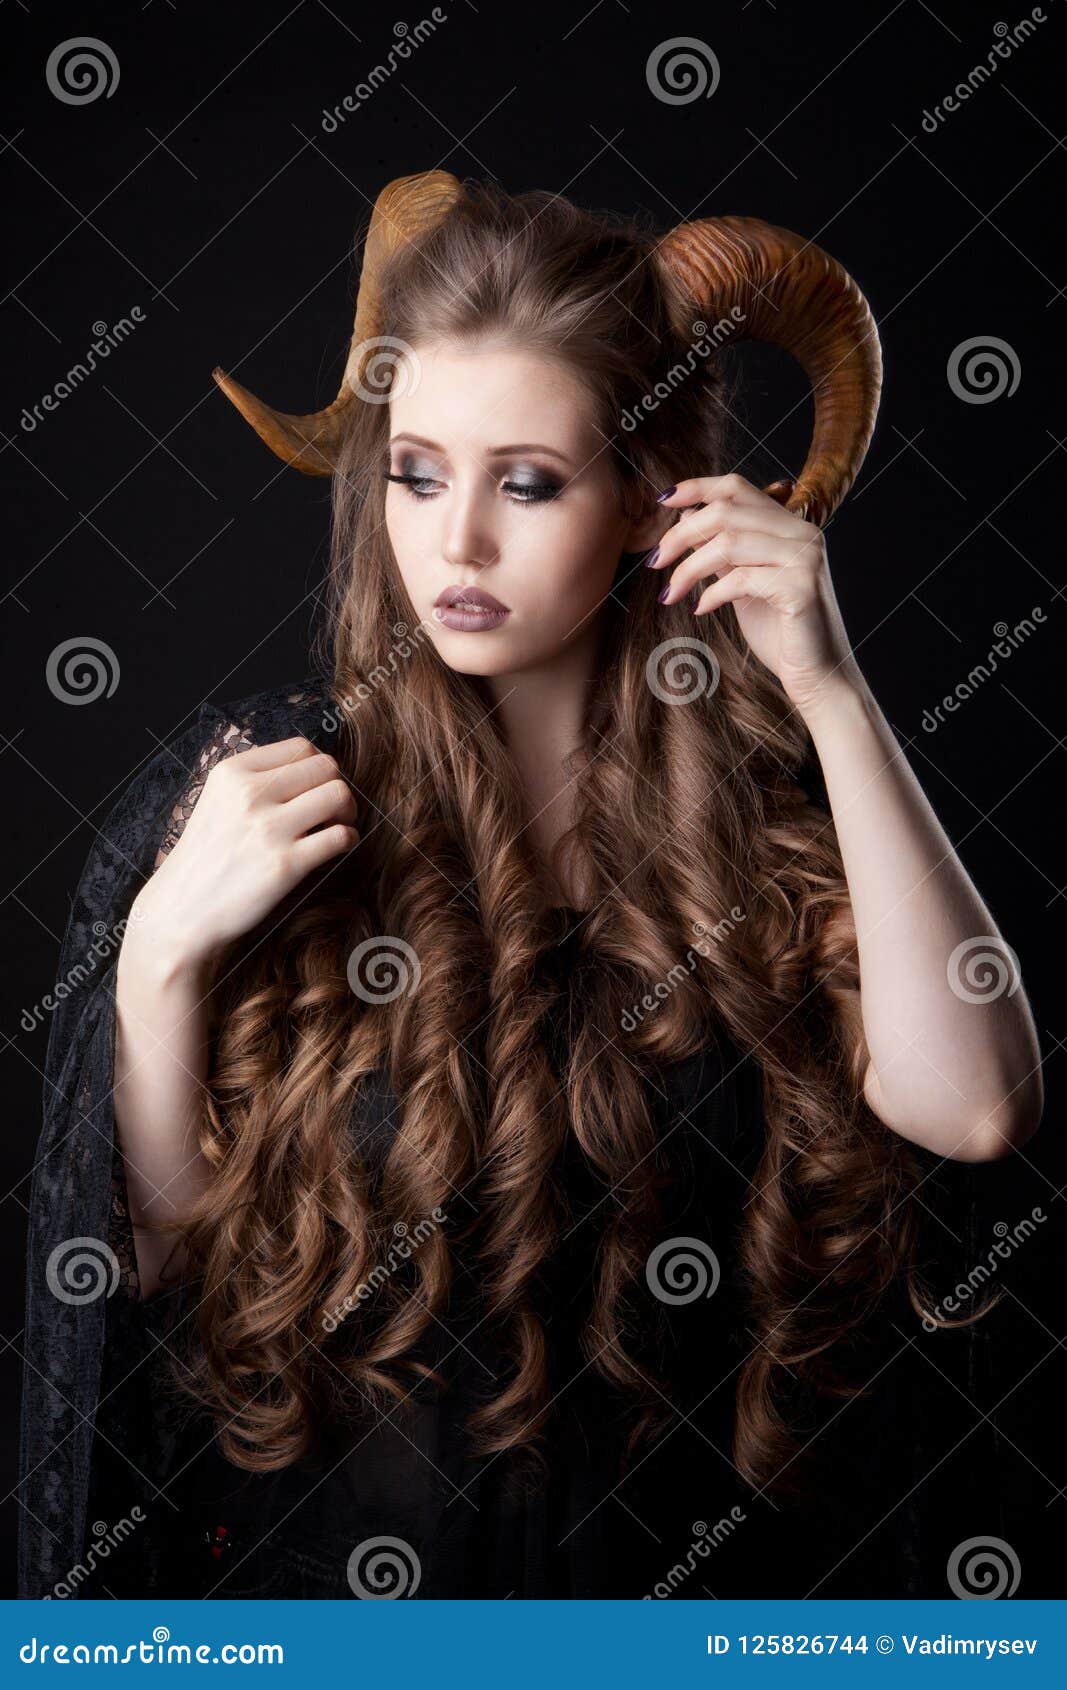 after regularly teasing my own bat's nest for years w my natural  dead-straight hair, I've just gotten a perm… any curly goths have styling  tips?? : r/GothFashion